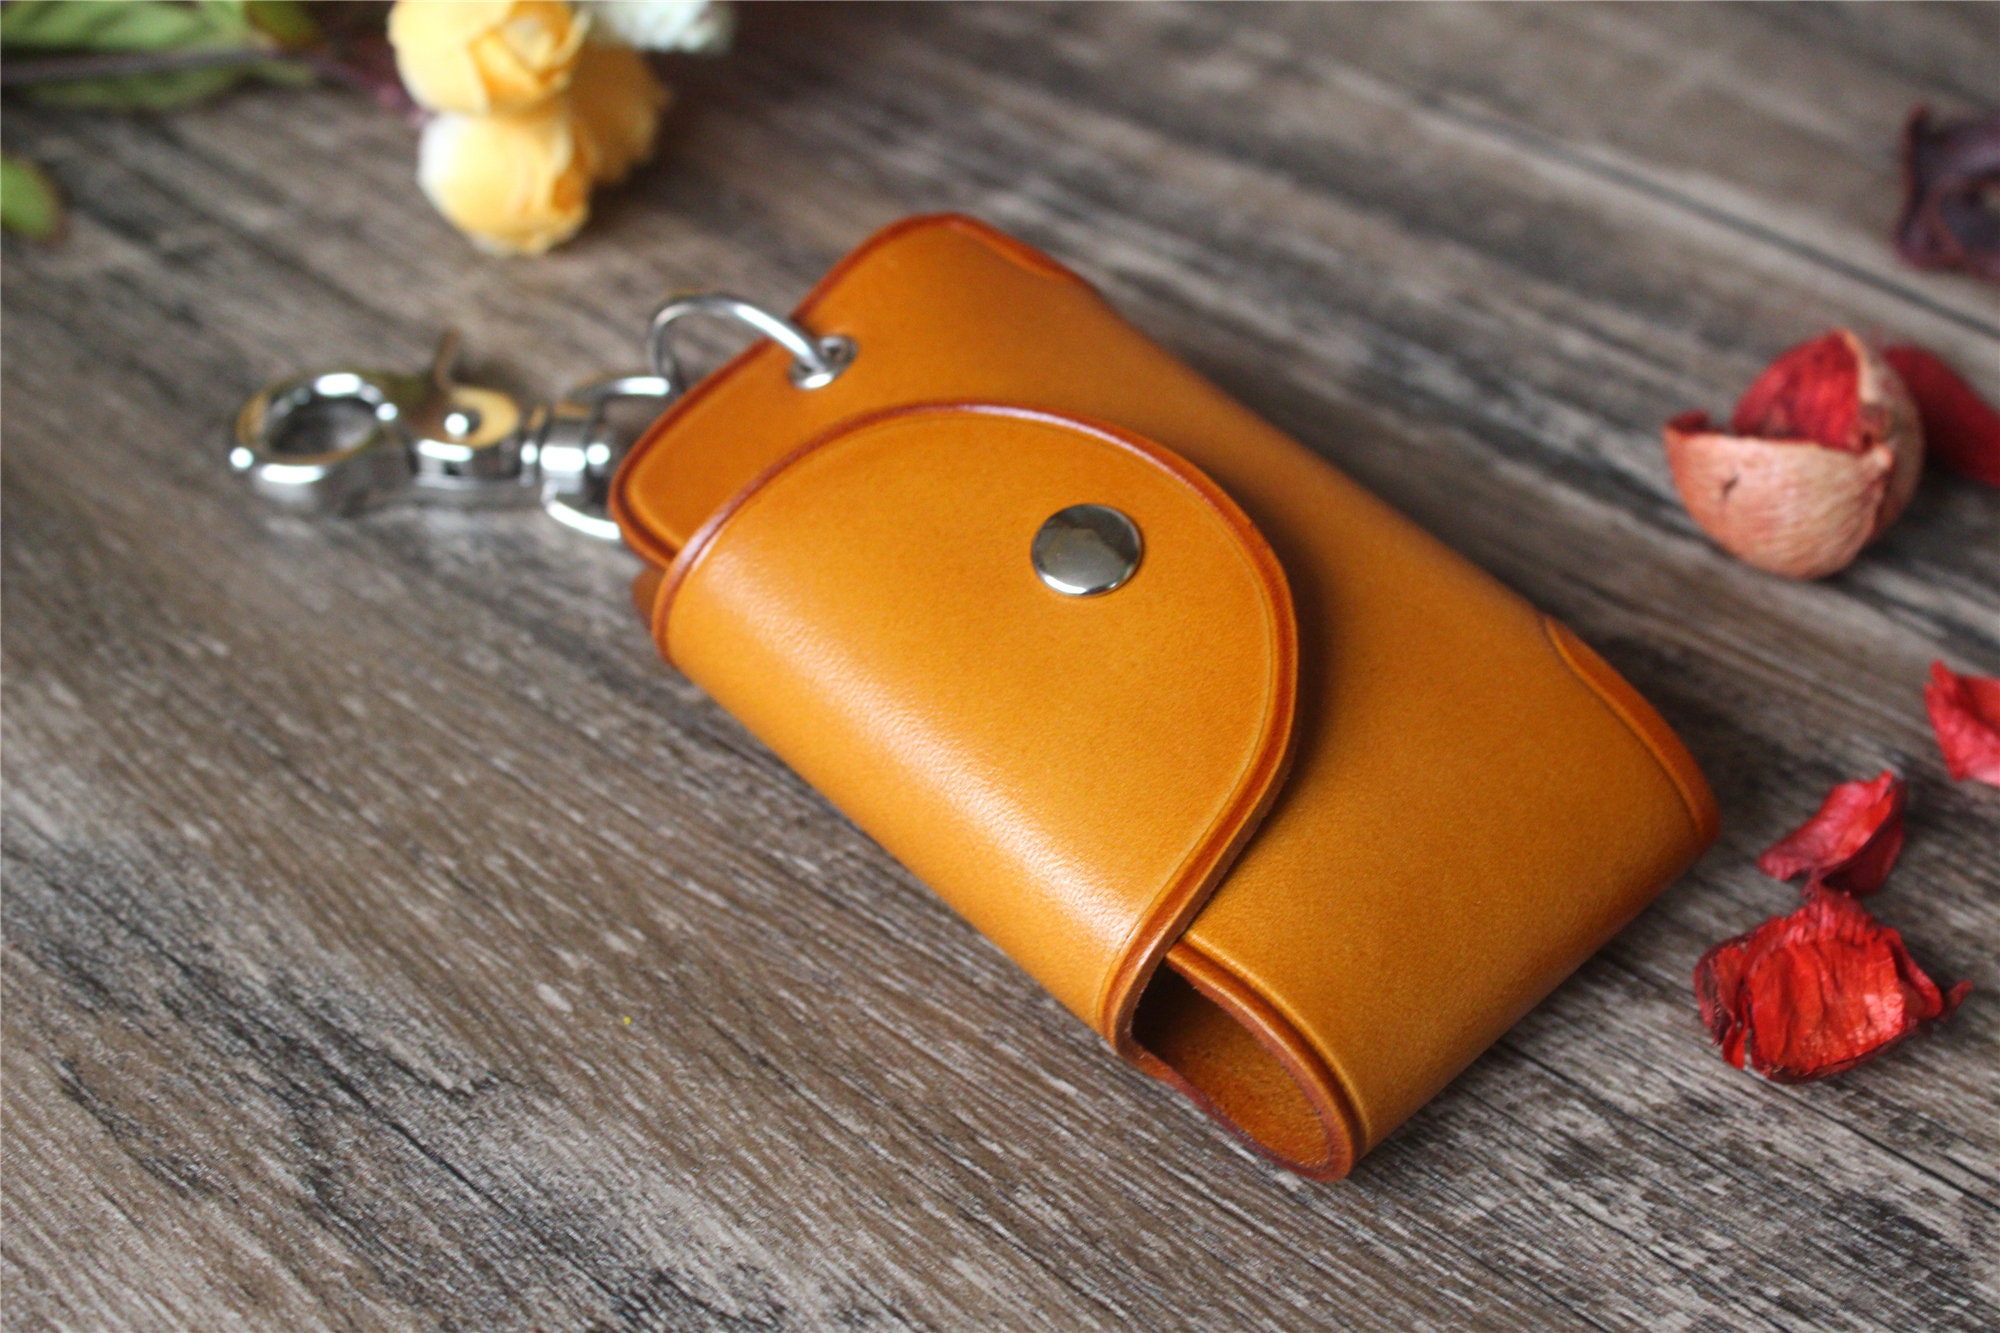 handmade Keychain leather Protective Key Case Cover key fob protector Key Holder Small Home Storage Bag Minimalist Key Ring Pouch Small 